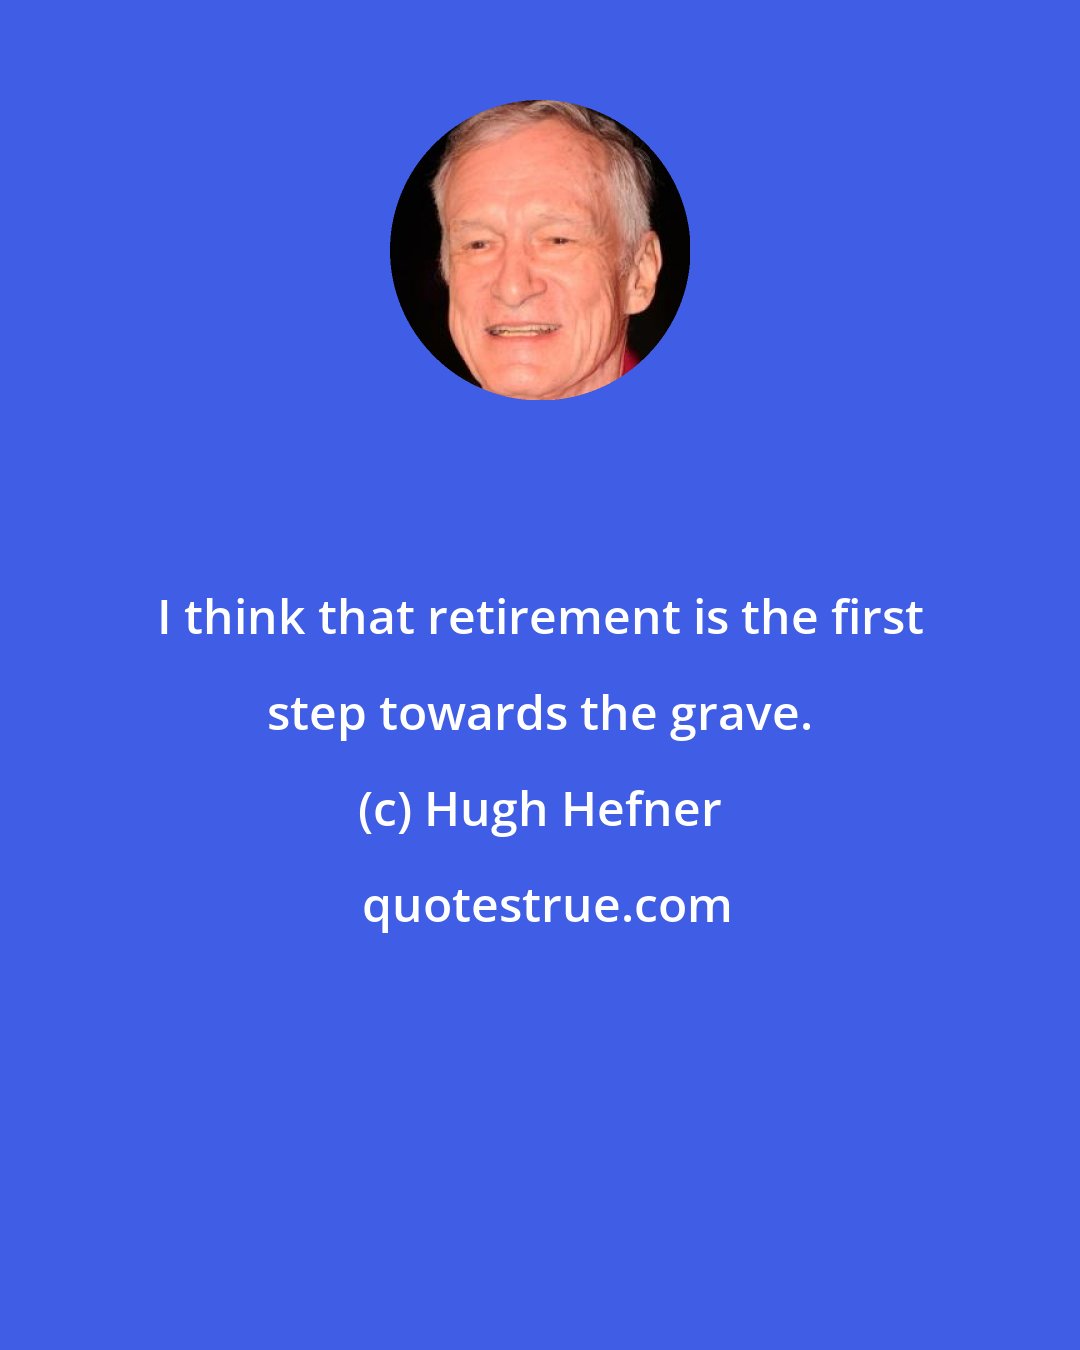 Hugh Hefner: I think that retirement is the first step towards the grave.